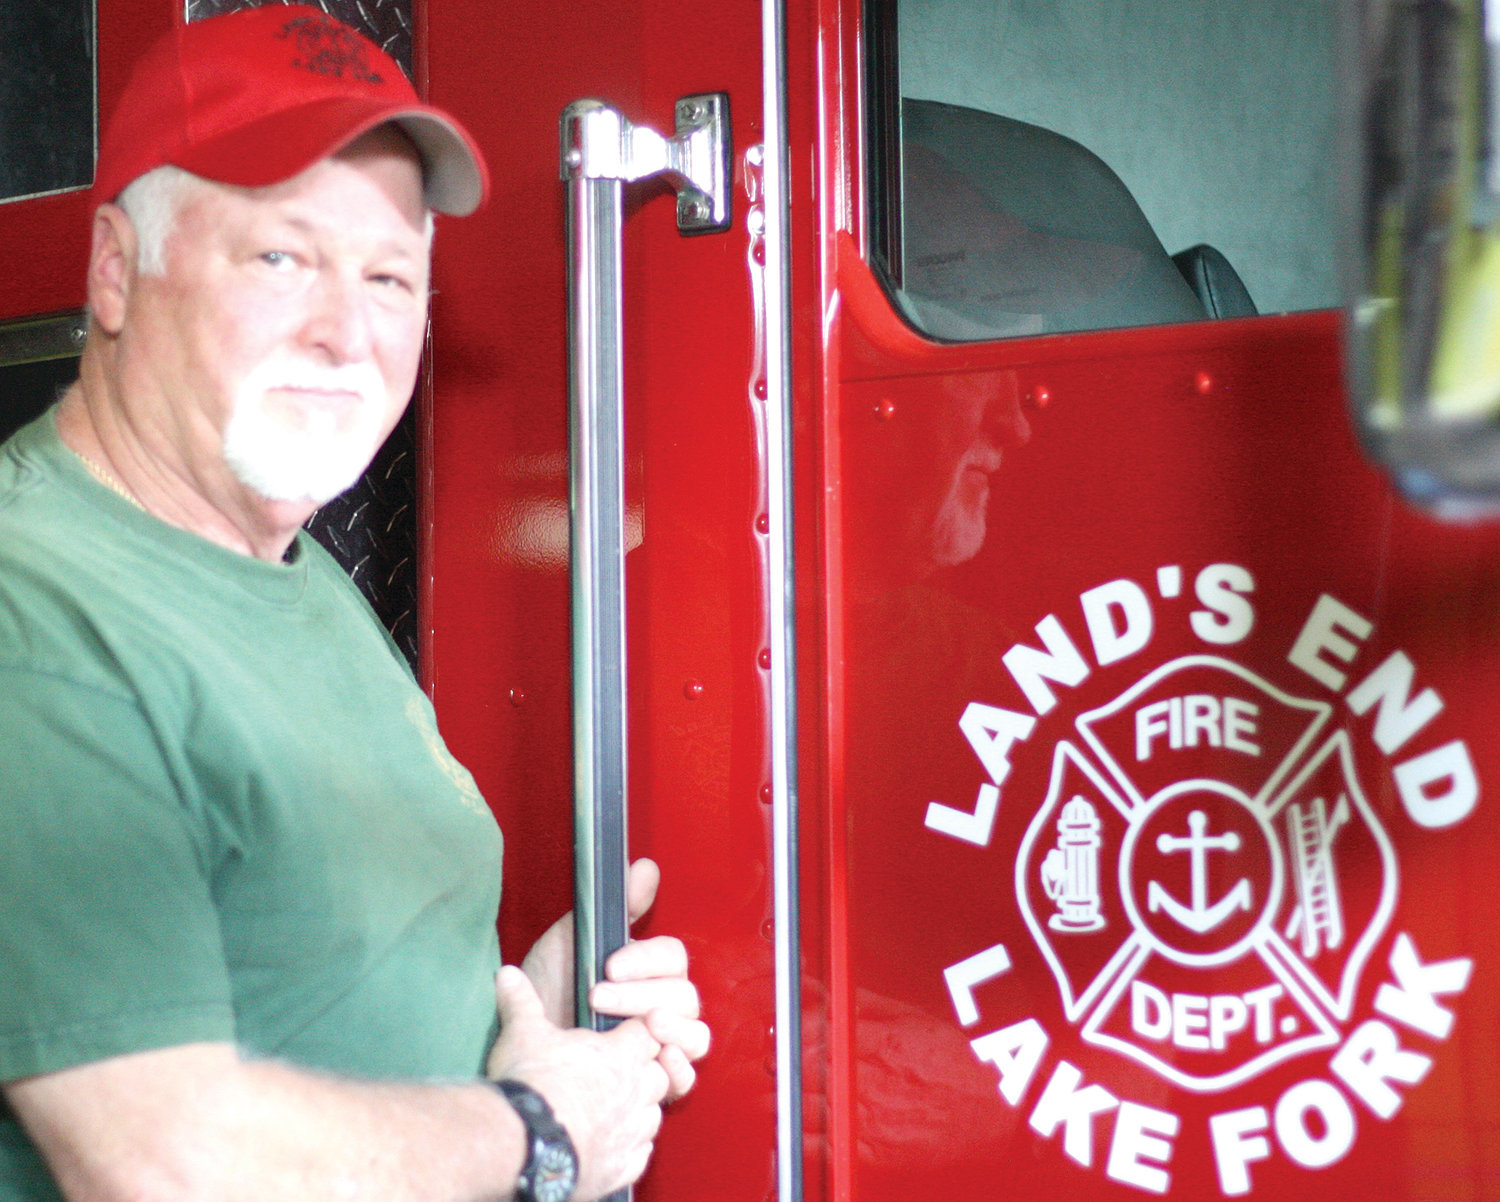 Land’s End Volunteer Fire Department Chief Rick Nichols praised the community volunteers who planned and executed the annual golf tourney last Saturday.